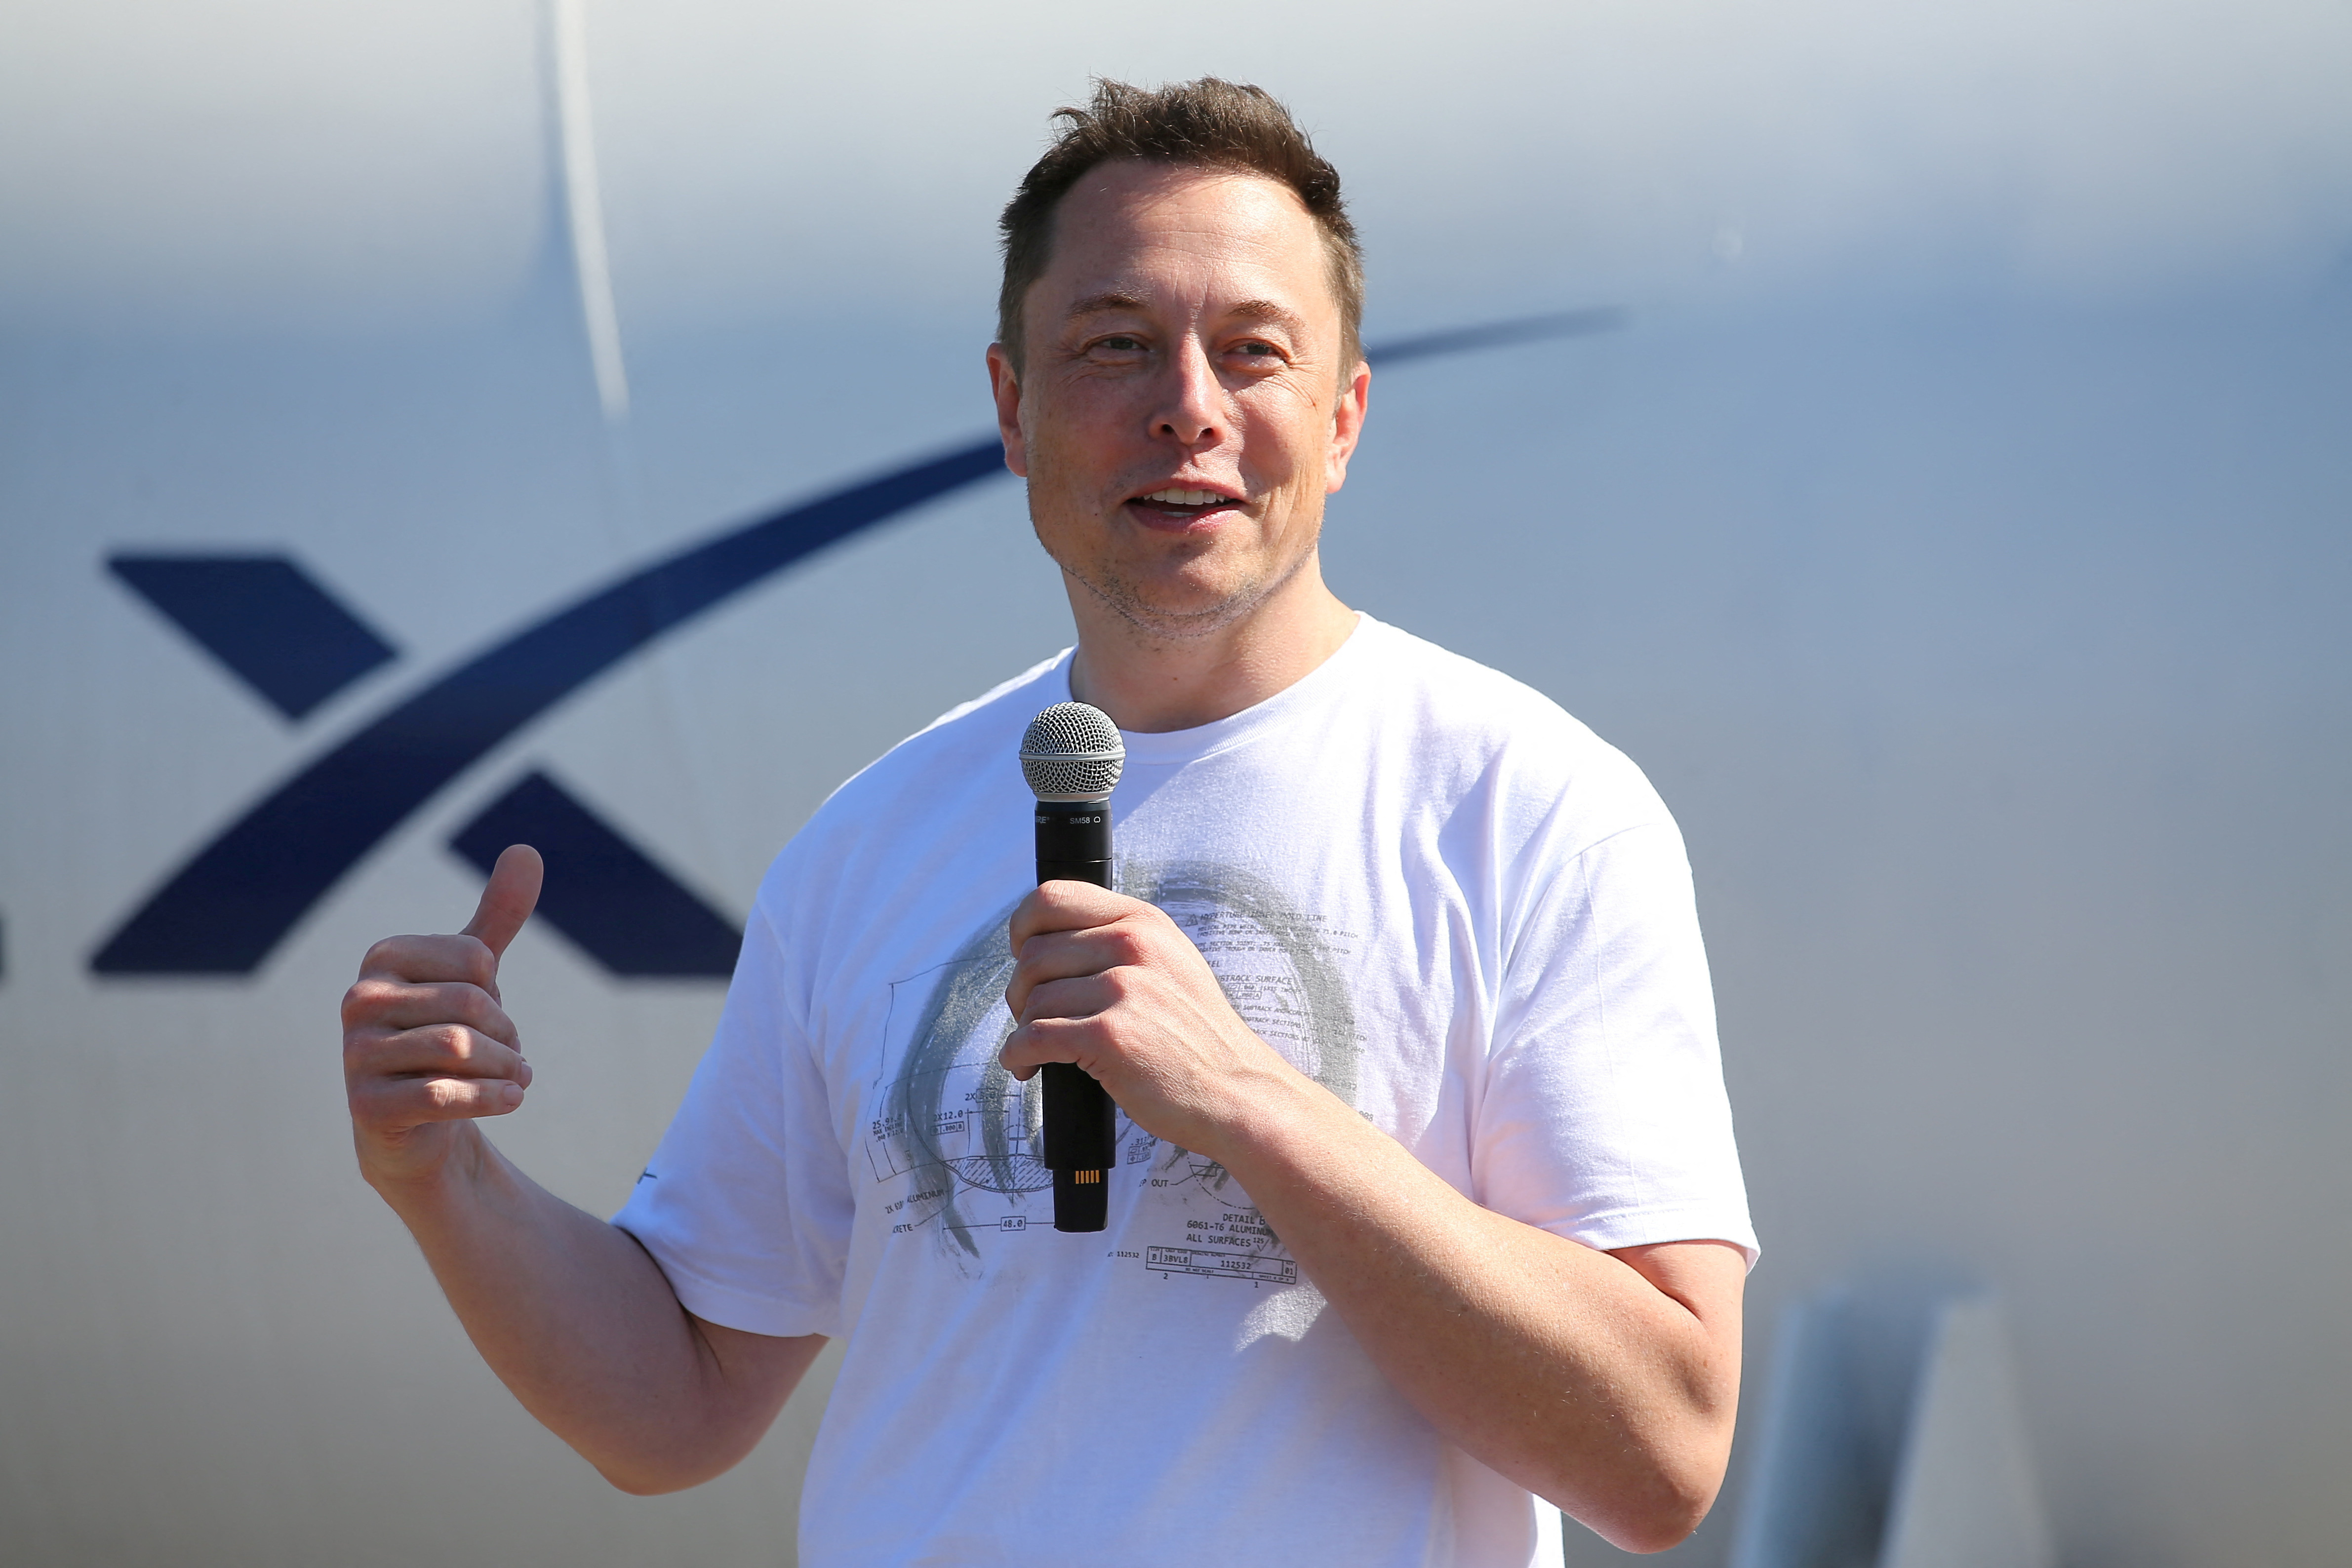 Elon Musk, founder, CEO and lead designer at SpaceX and co-founder of Tesla, speaks at the SpaceX Hyperloop Pod Competition II in Hawthorne